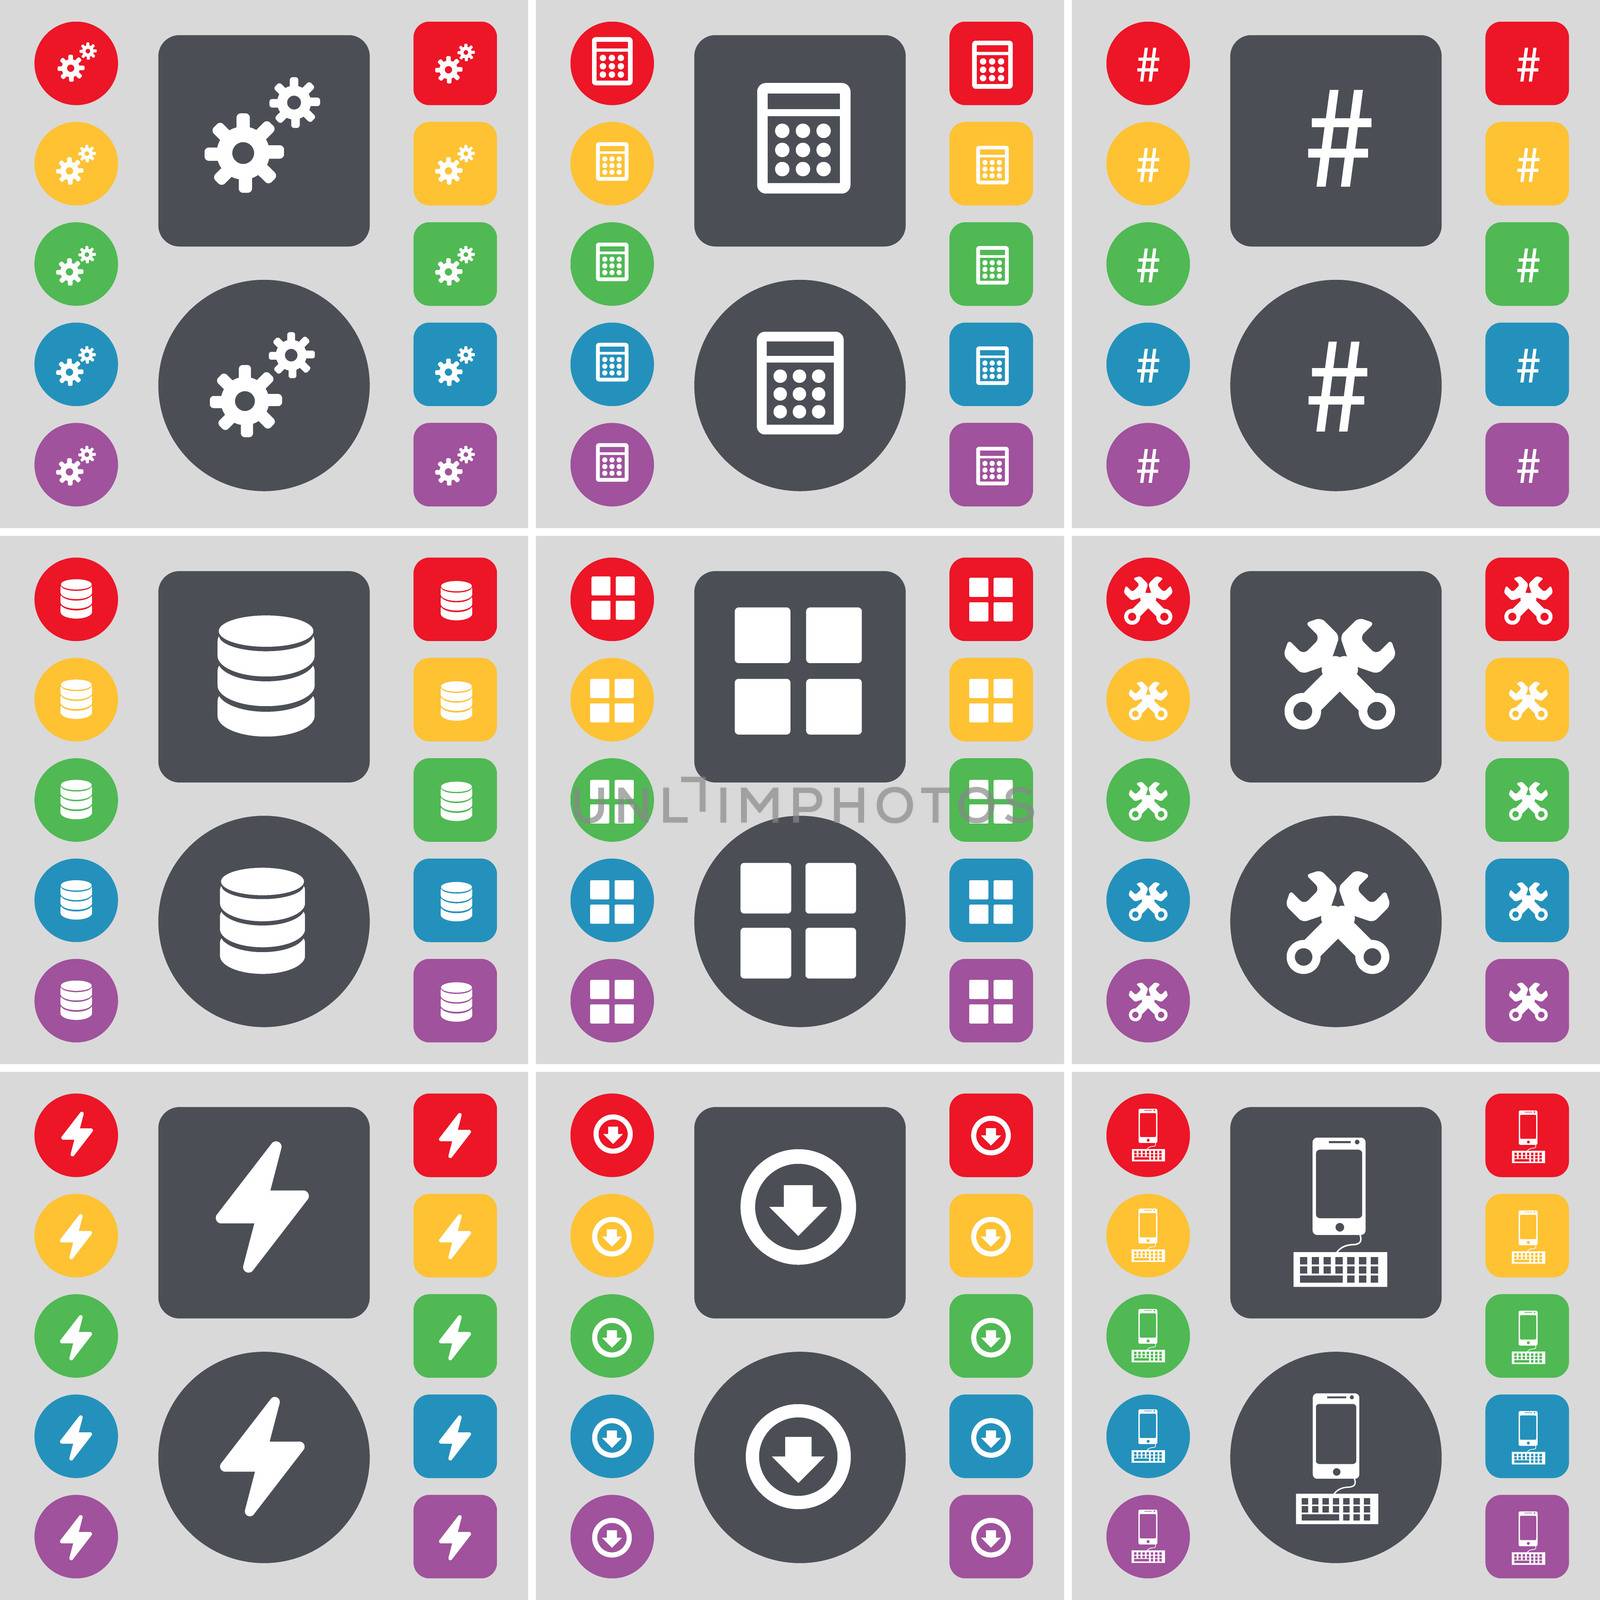 Gear, Calculator, Hashtag, Database, Apps, Wrench, Flash, Arrow down, Smartphone icon symbol. A large set of flat, colored buttons for your design. illustration